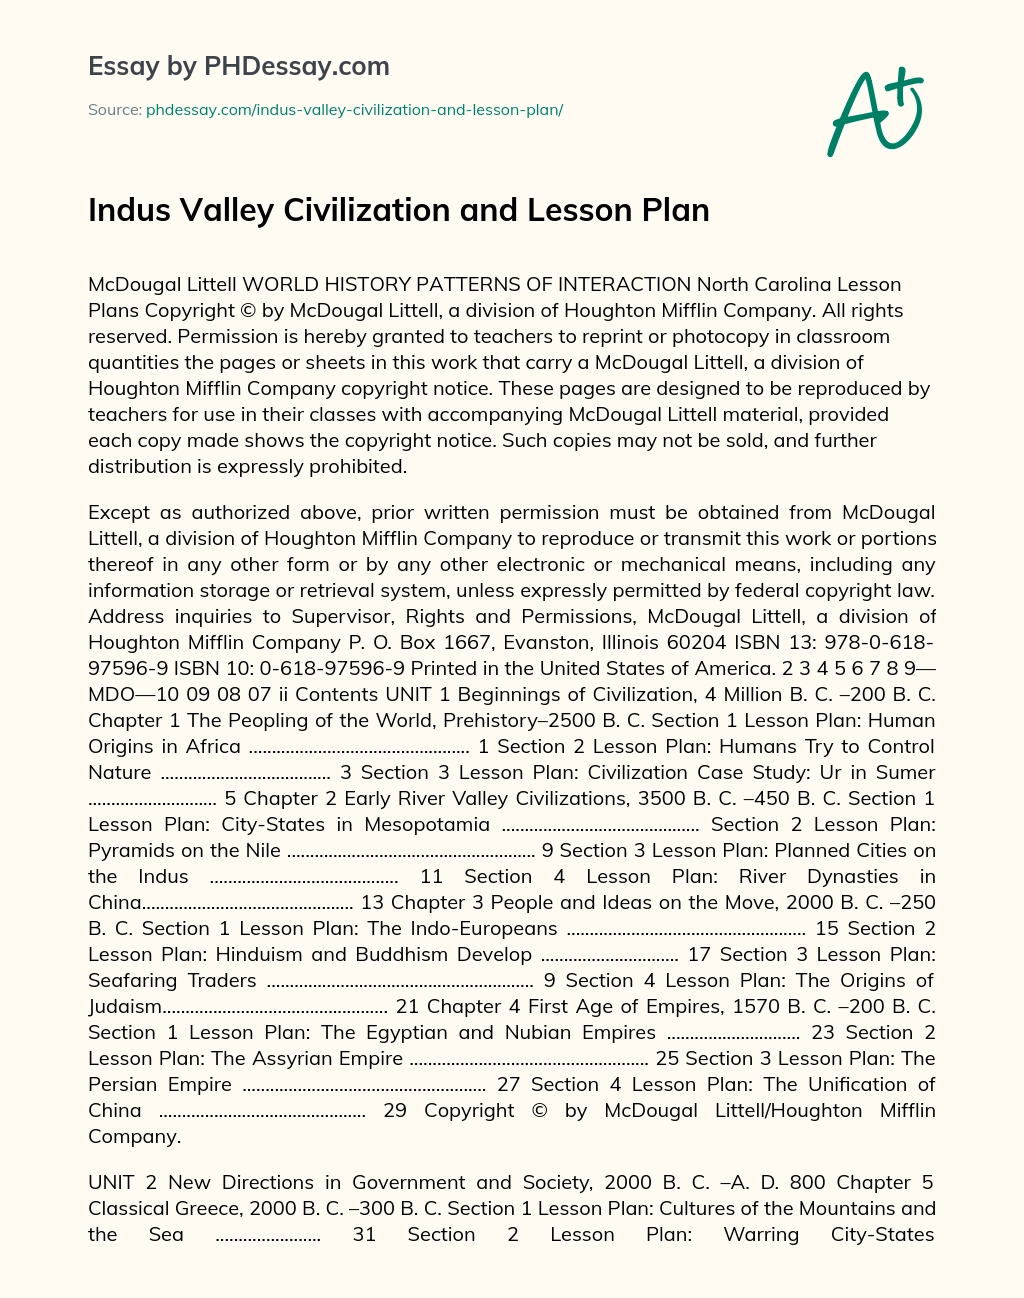 Indus Valley Civilization and Lesson Plan essay